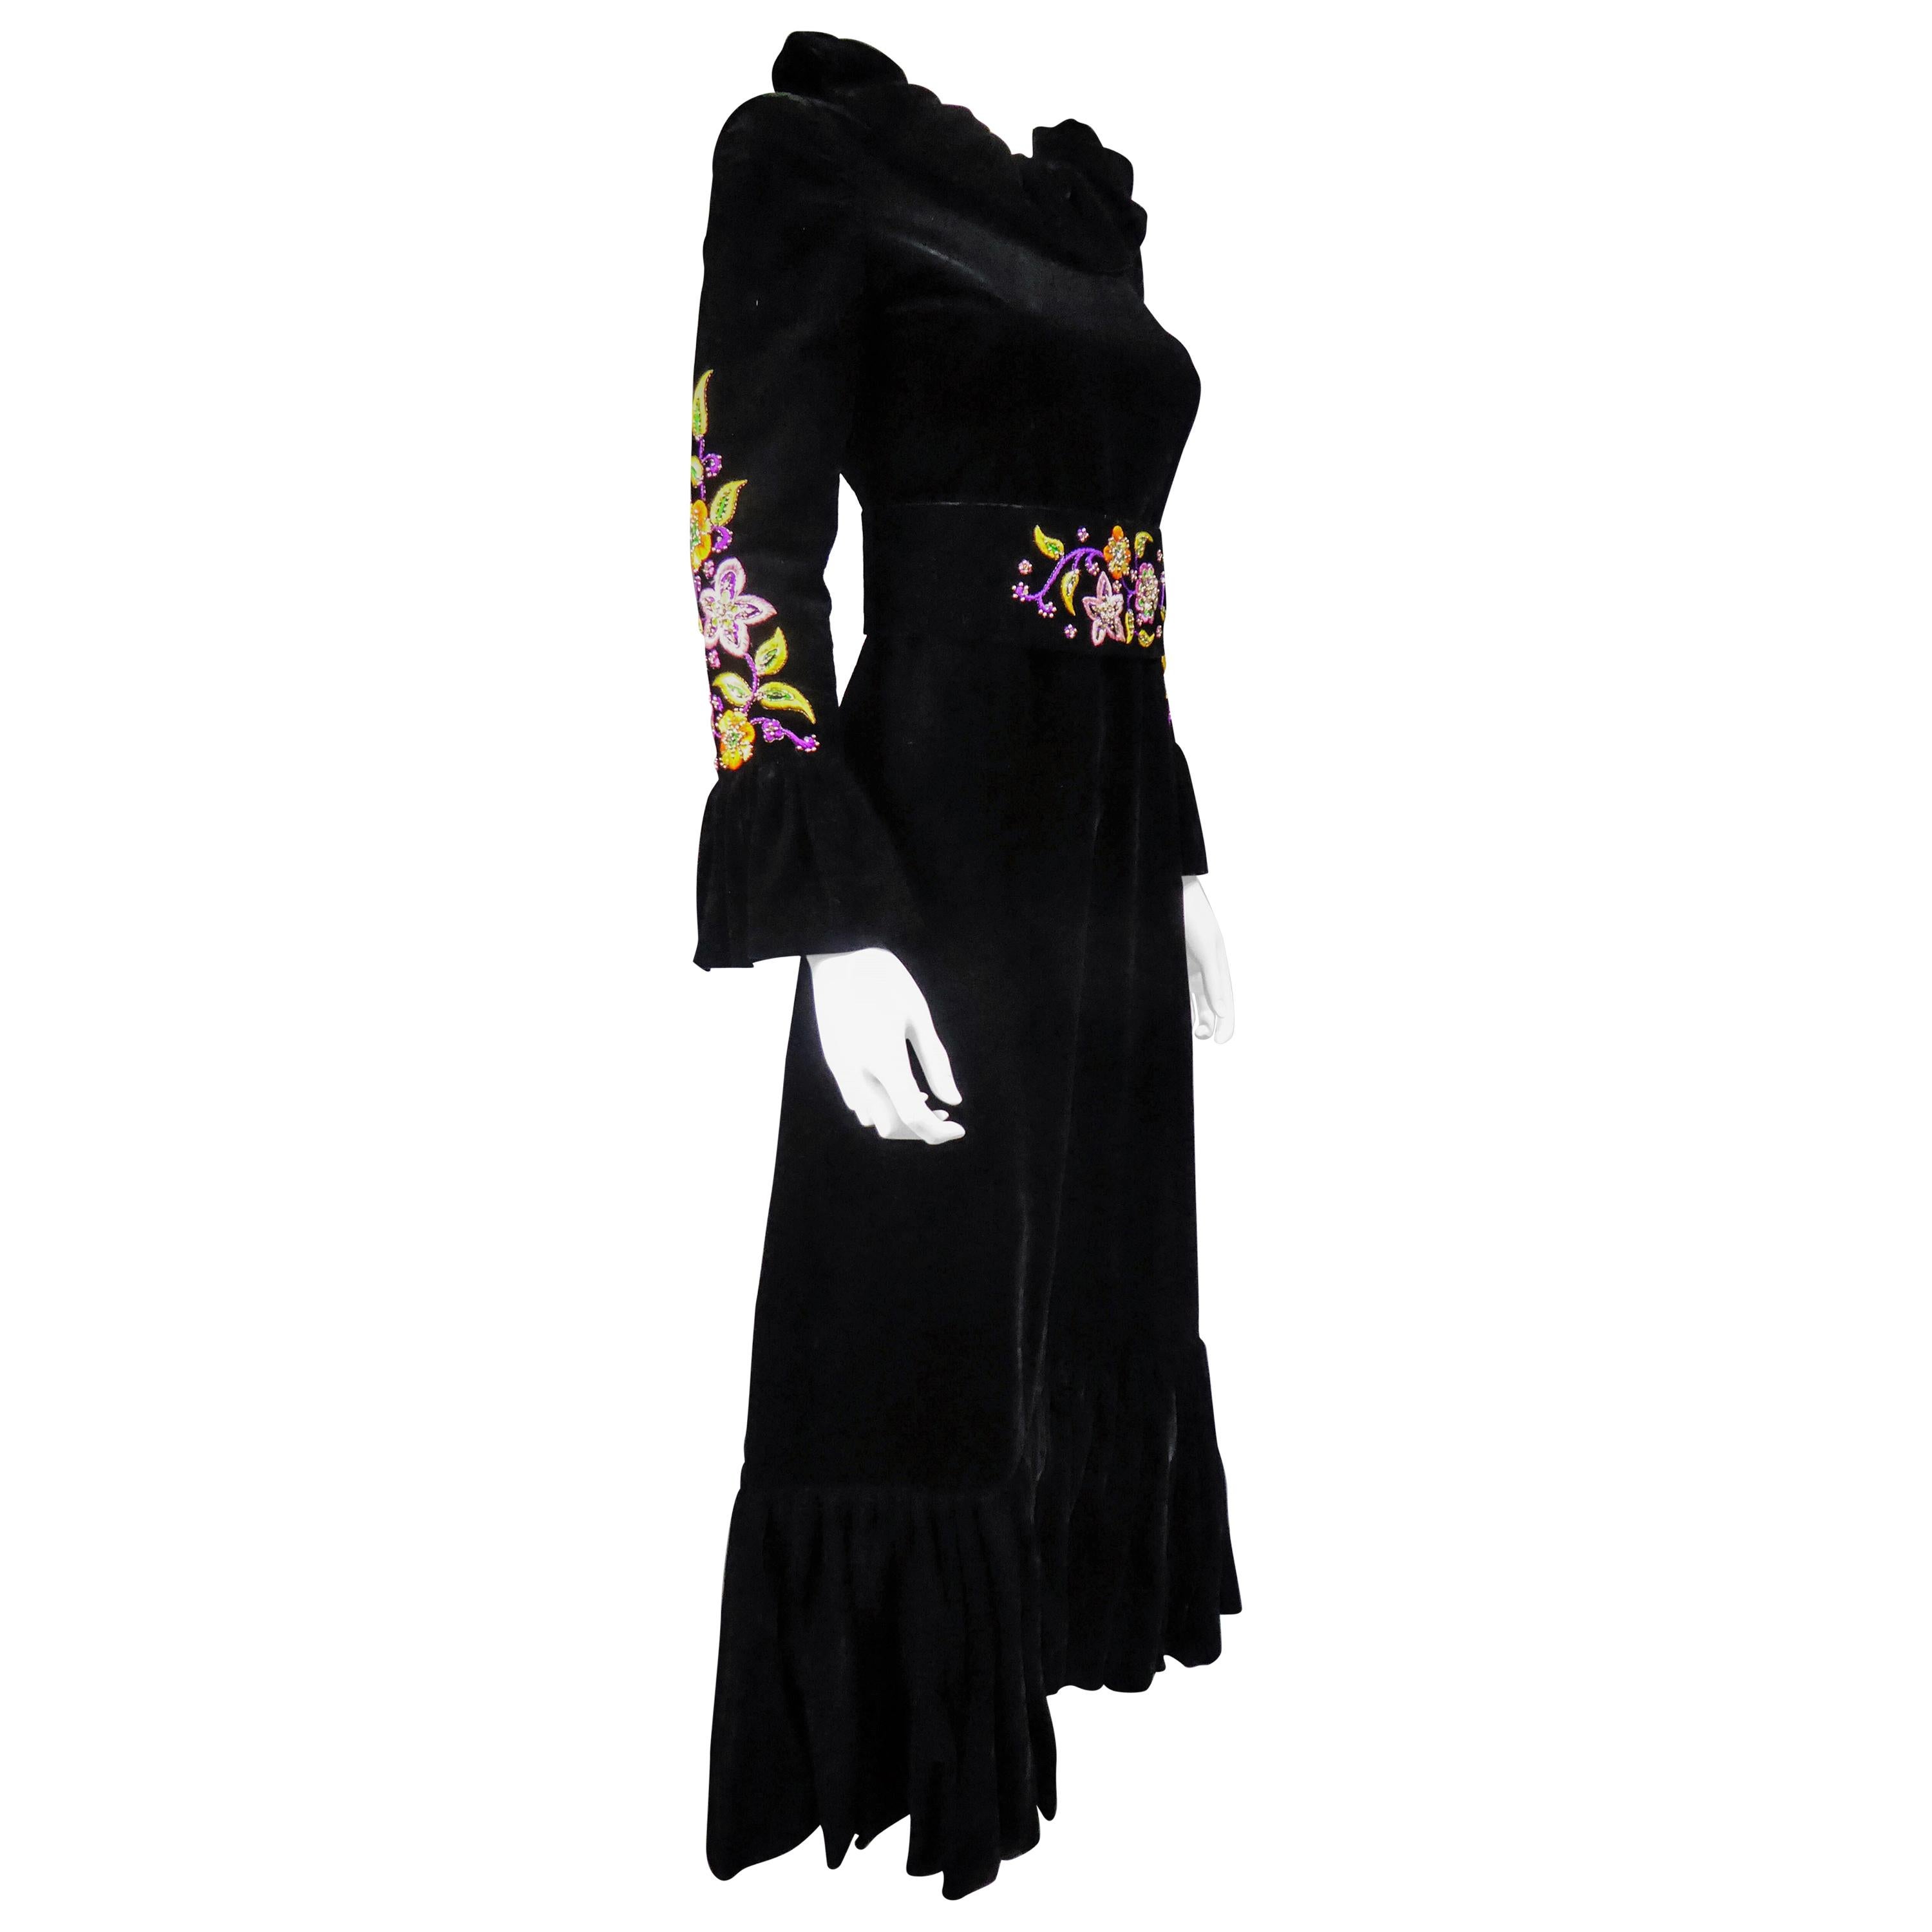 Circa 1990
France

Long evening dress in black silk velvet by Jean-Louis Scherrer Haute Couture dating from the 1990s. Pleated collar in bouillonné velvet ruff found on the sleeves and the bottom of the dress which is flared. Psyquedelic embroidery